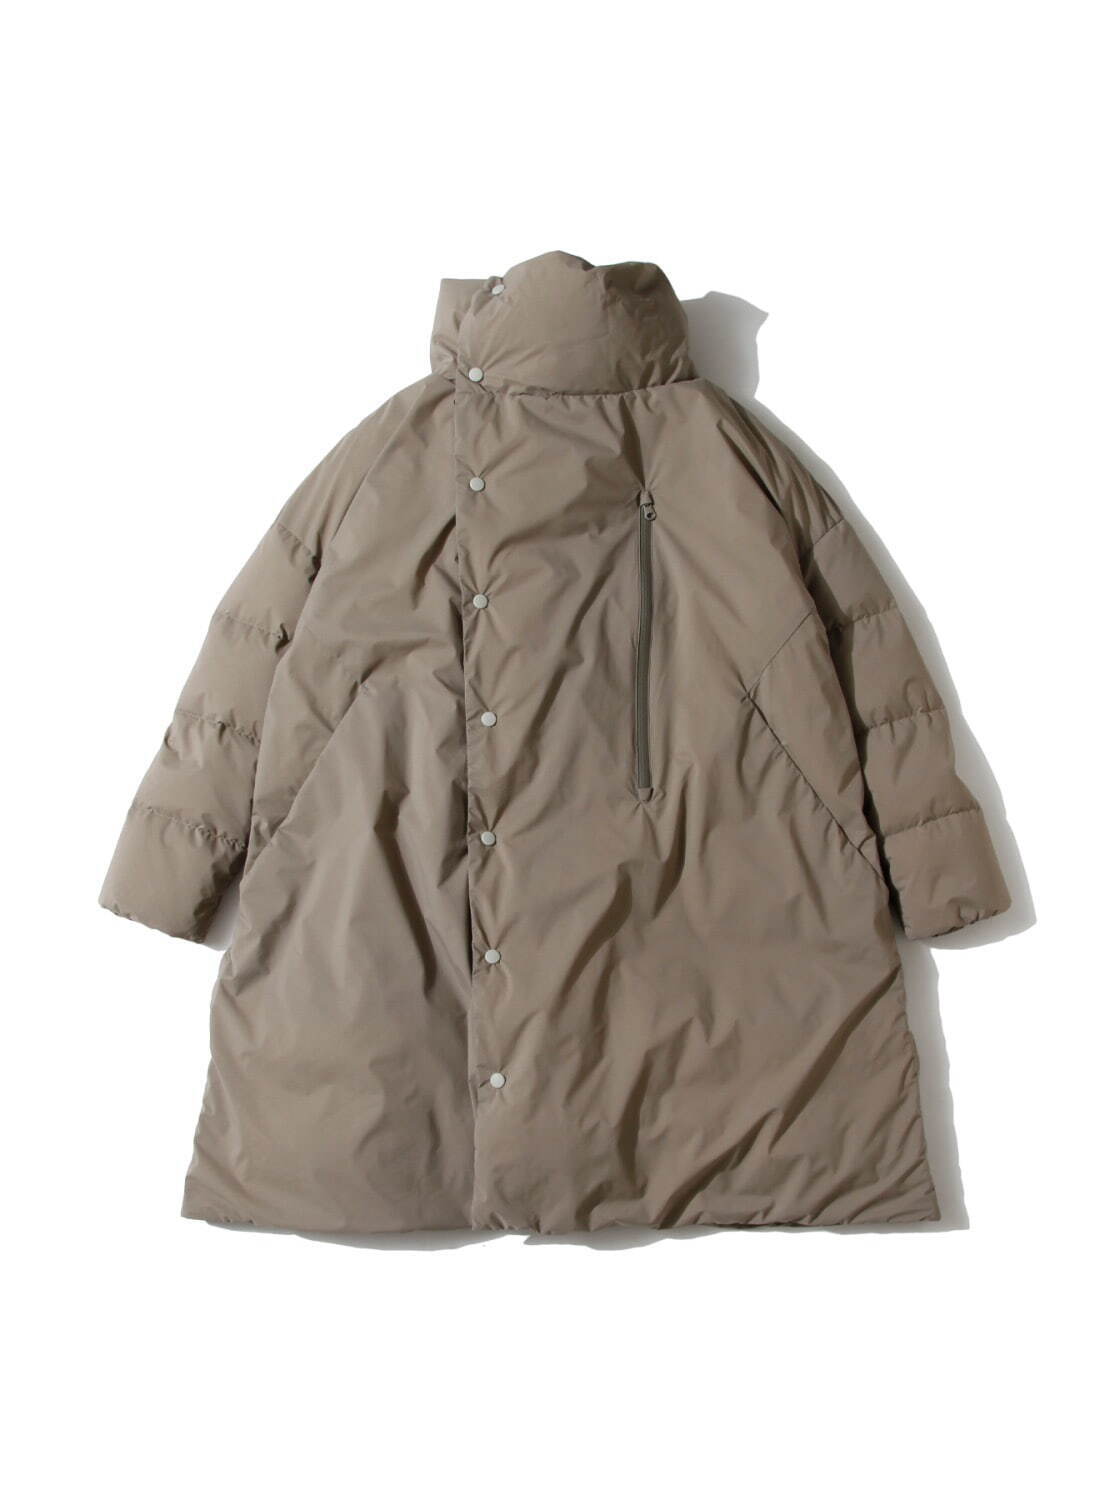 FT STAND DOWN COAT 74,800円